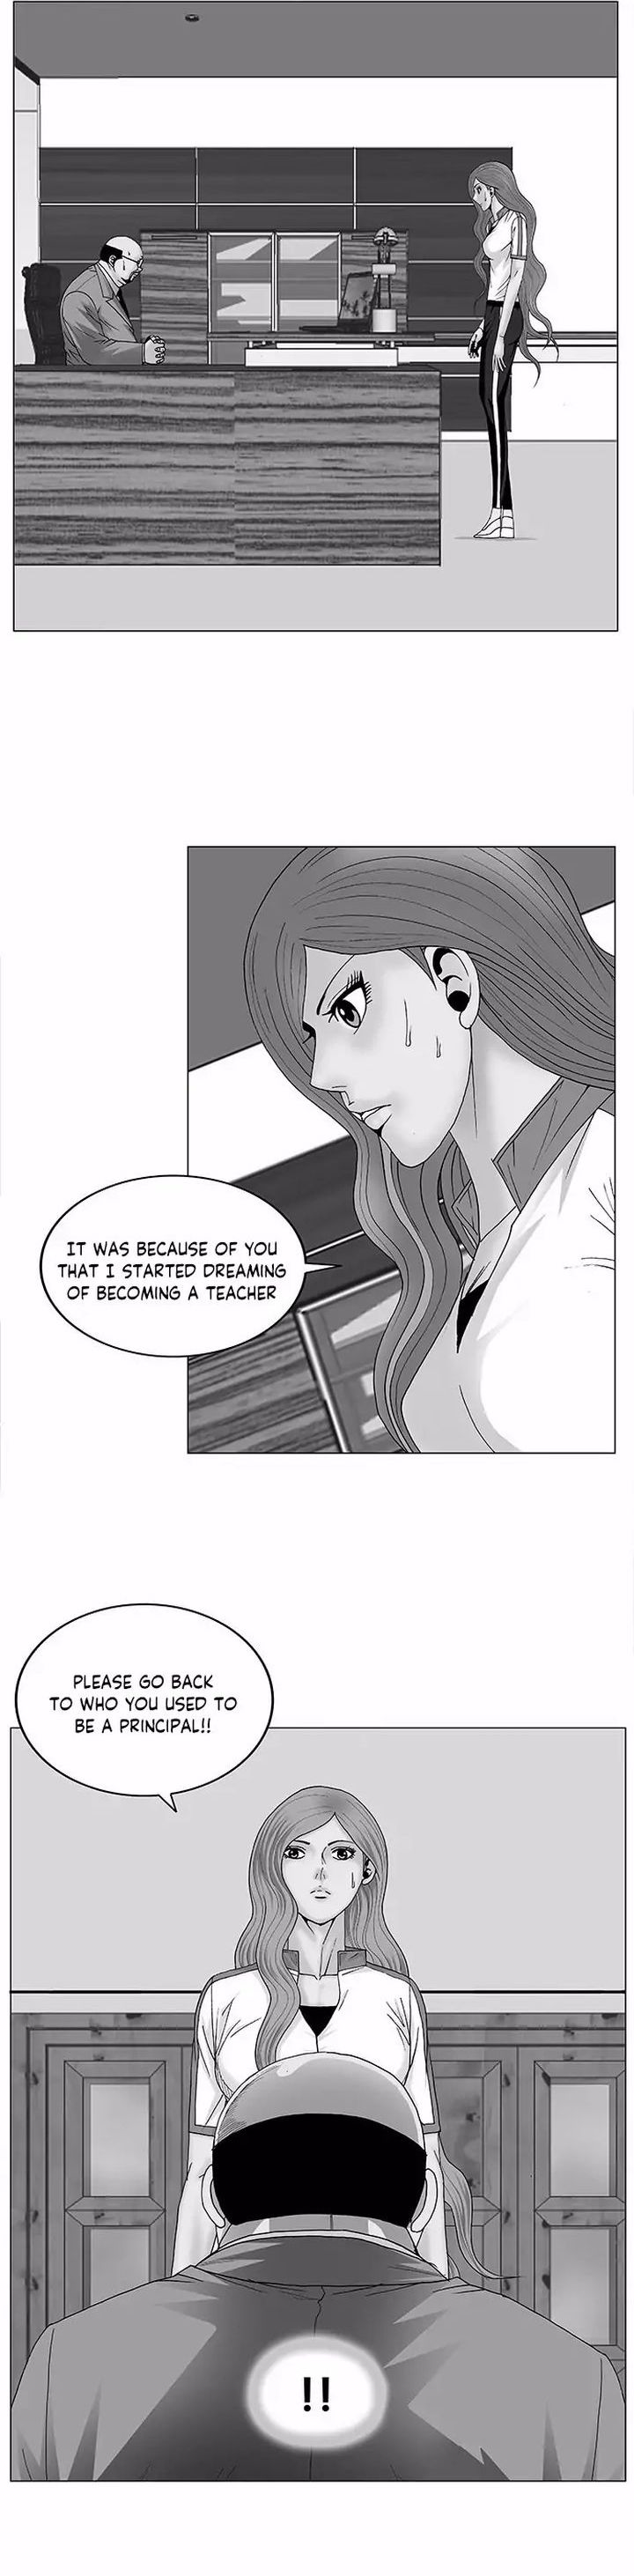 Ultimate Legend Kang Hae Hyo Chapter 91 Page 1